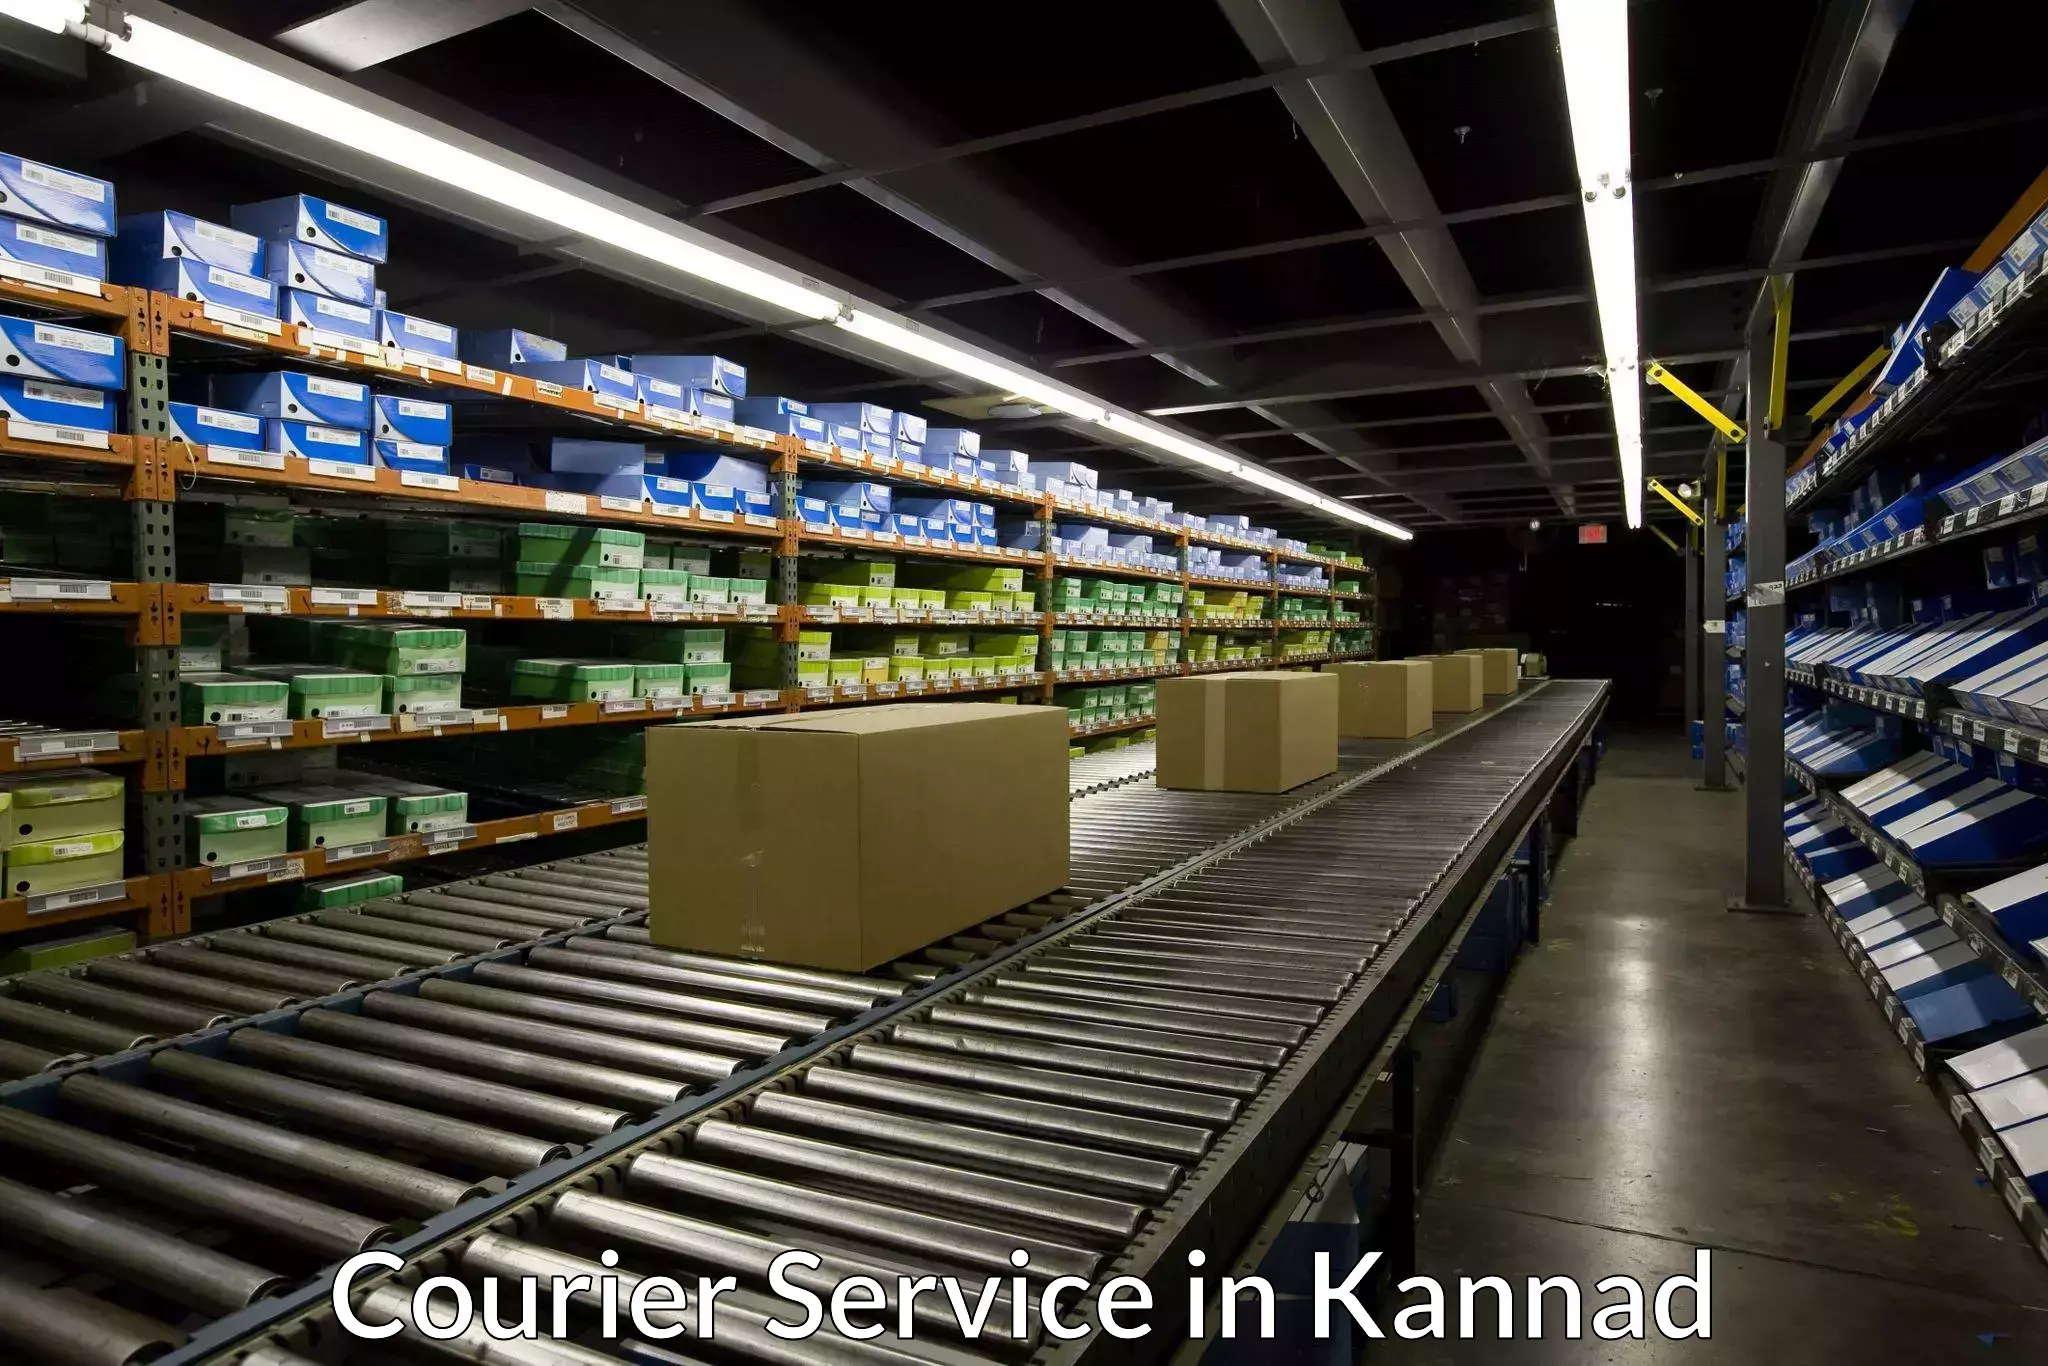 Courier service efficiency in Kannad